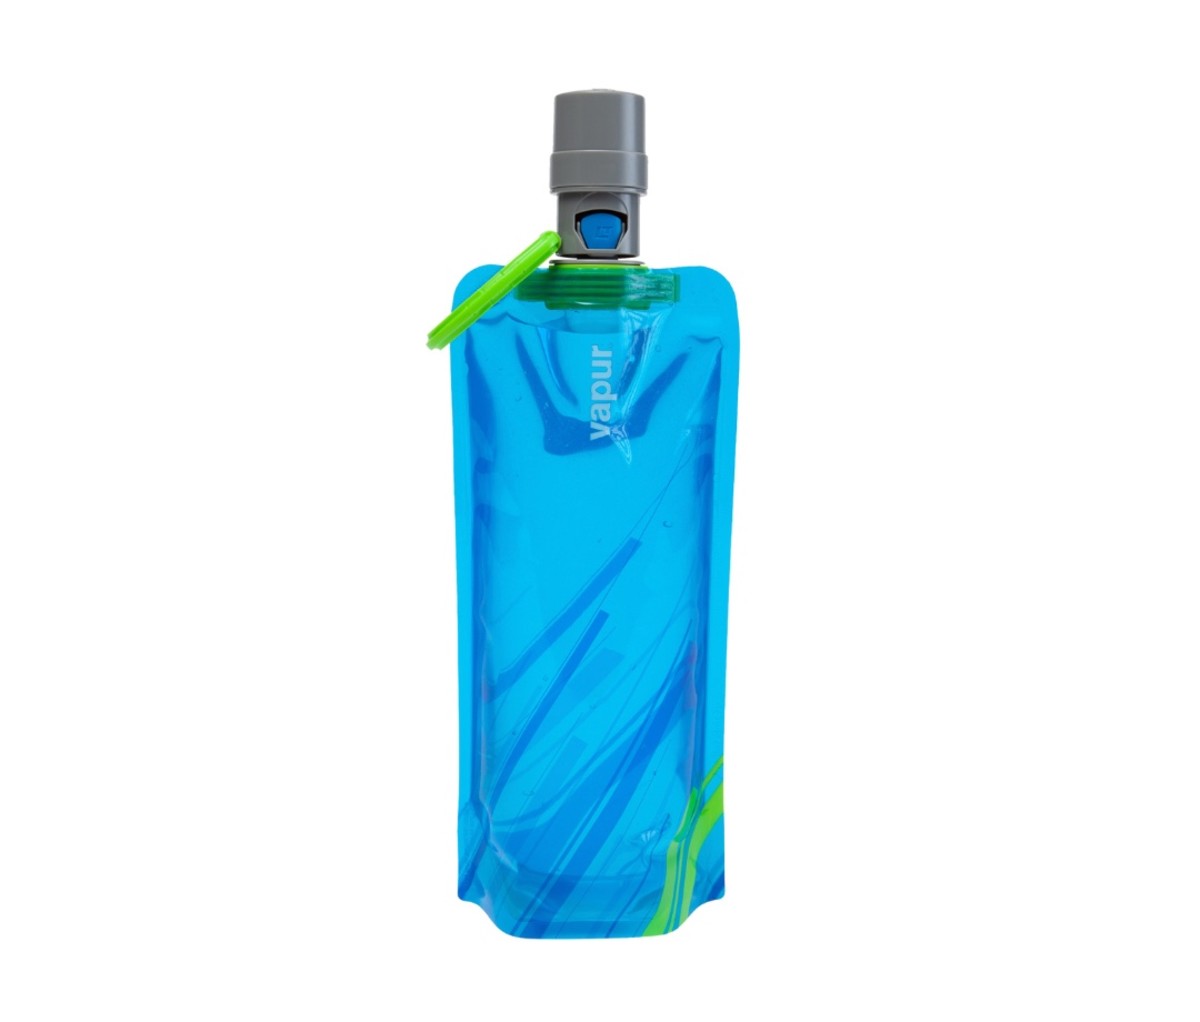 Hydrate your dog no matter the distance with the Vapor EZ Lick Bottle.